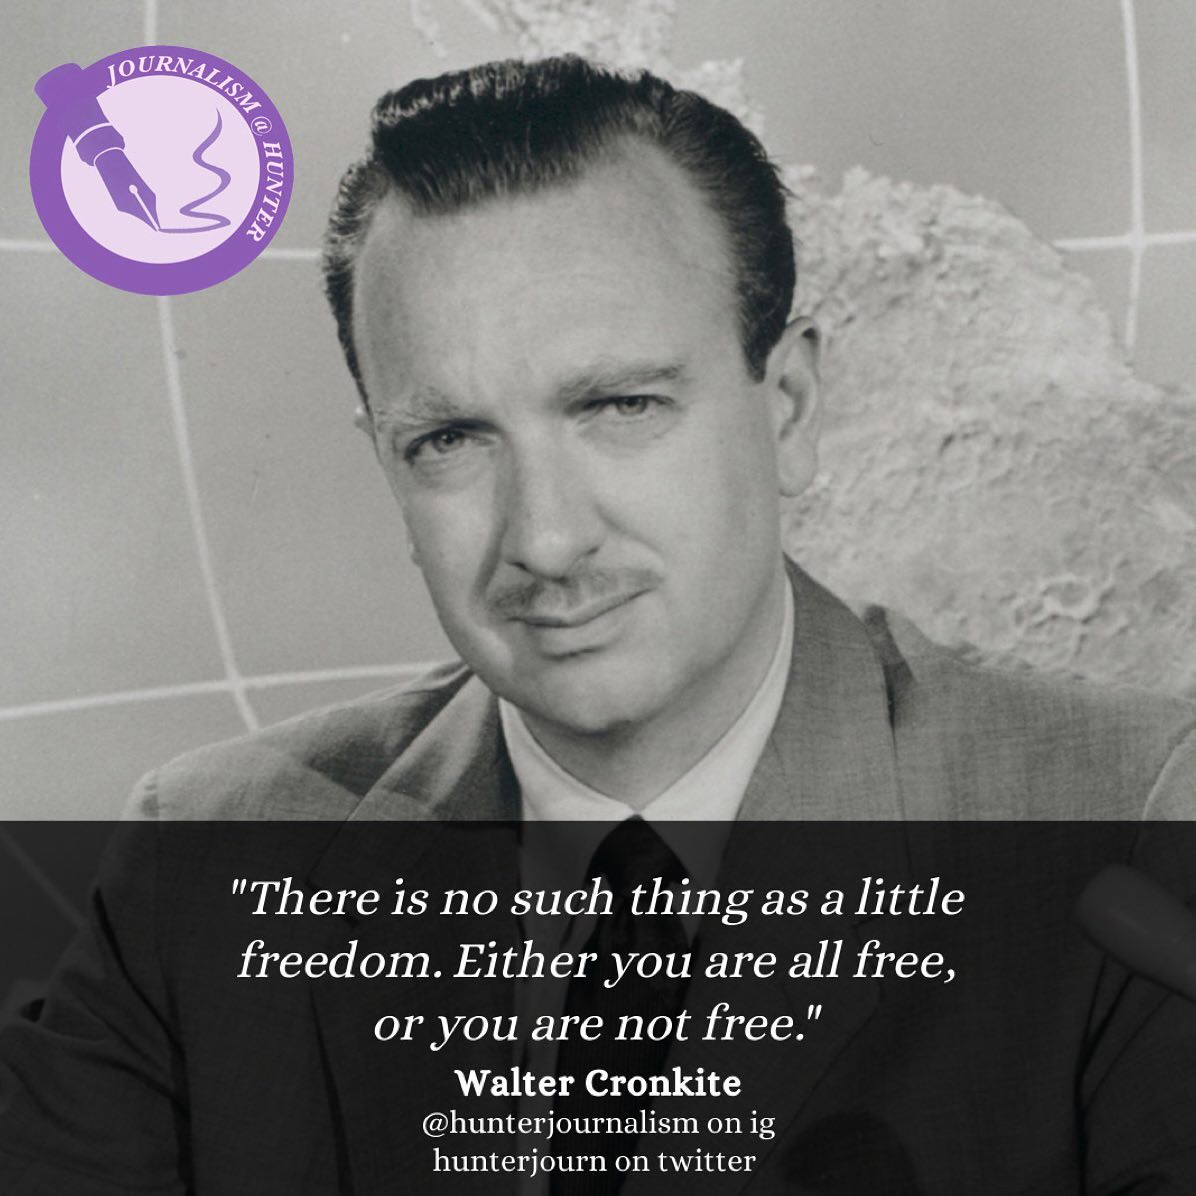 Happy #QOTD! Today’s quote is from Walter Cronkite, often cited as the “Most Trusted Man in America” in the 60s and 70s. Have a great week! 

#JournalismAtHunter